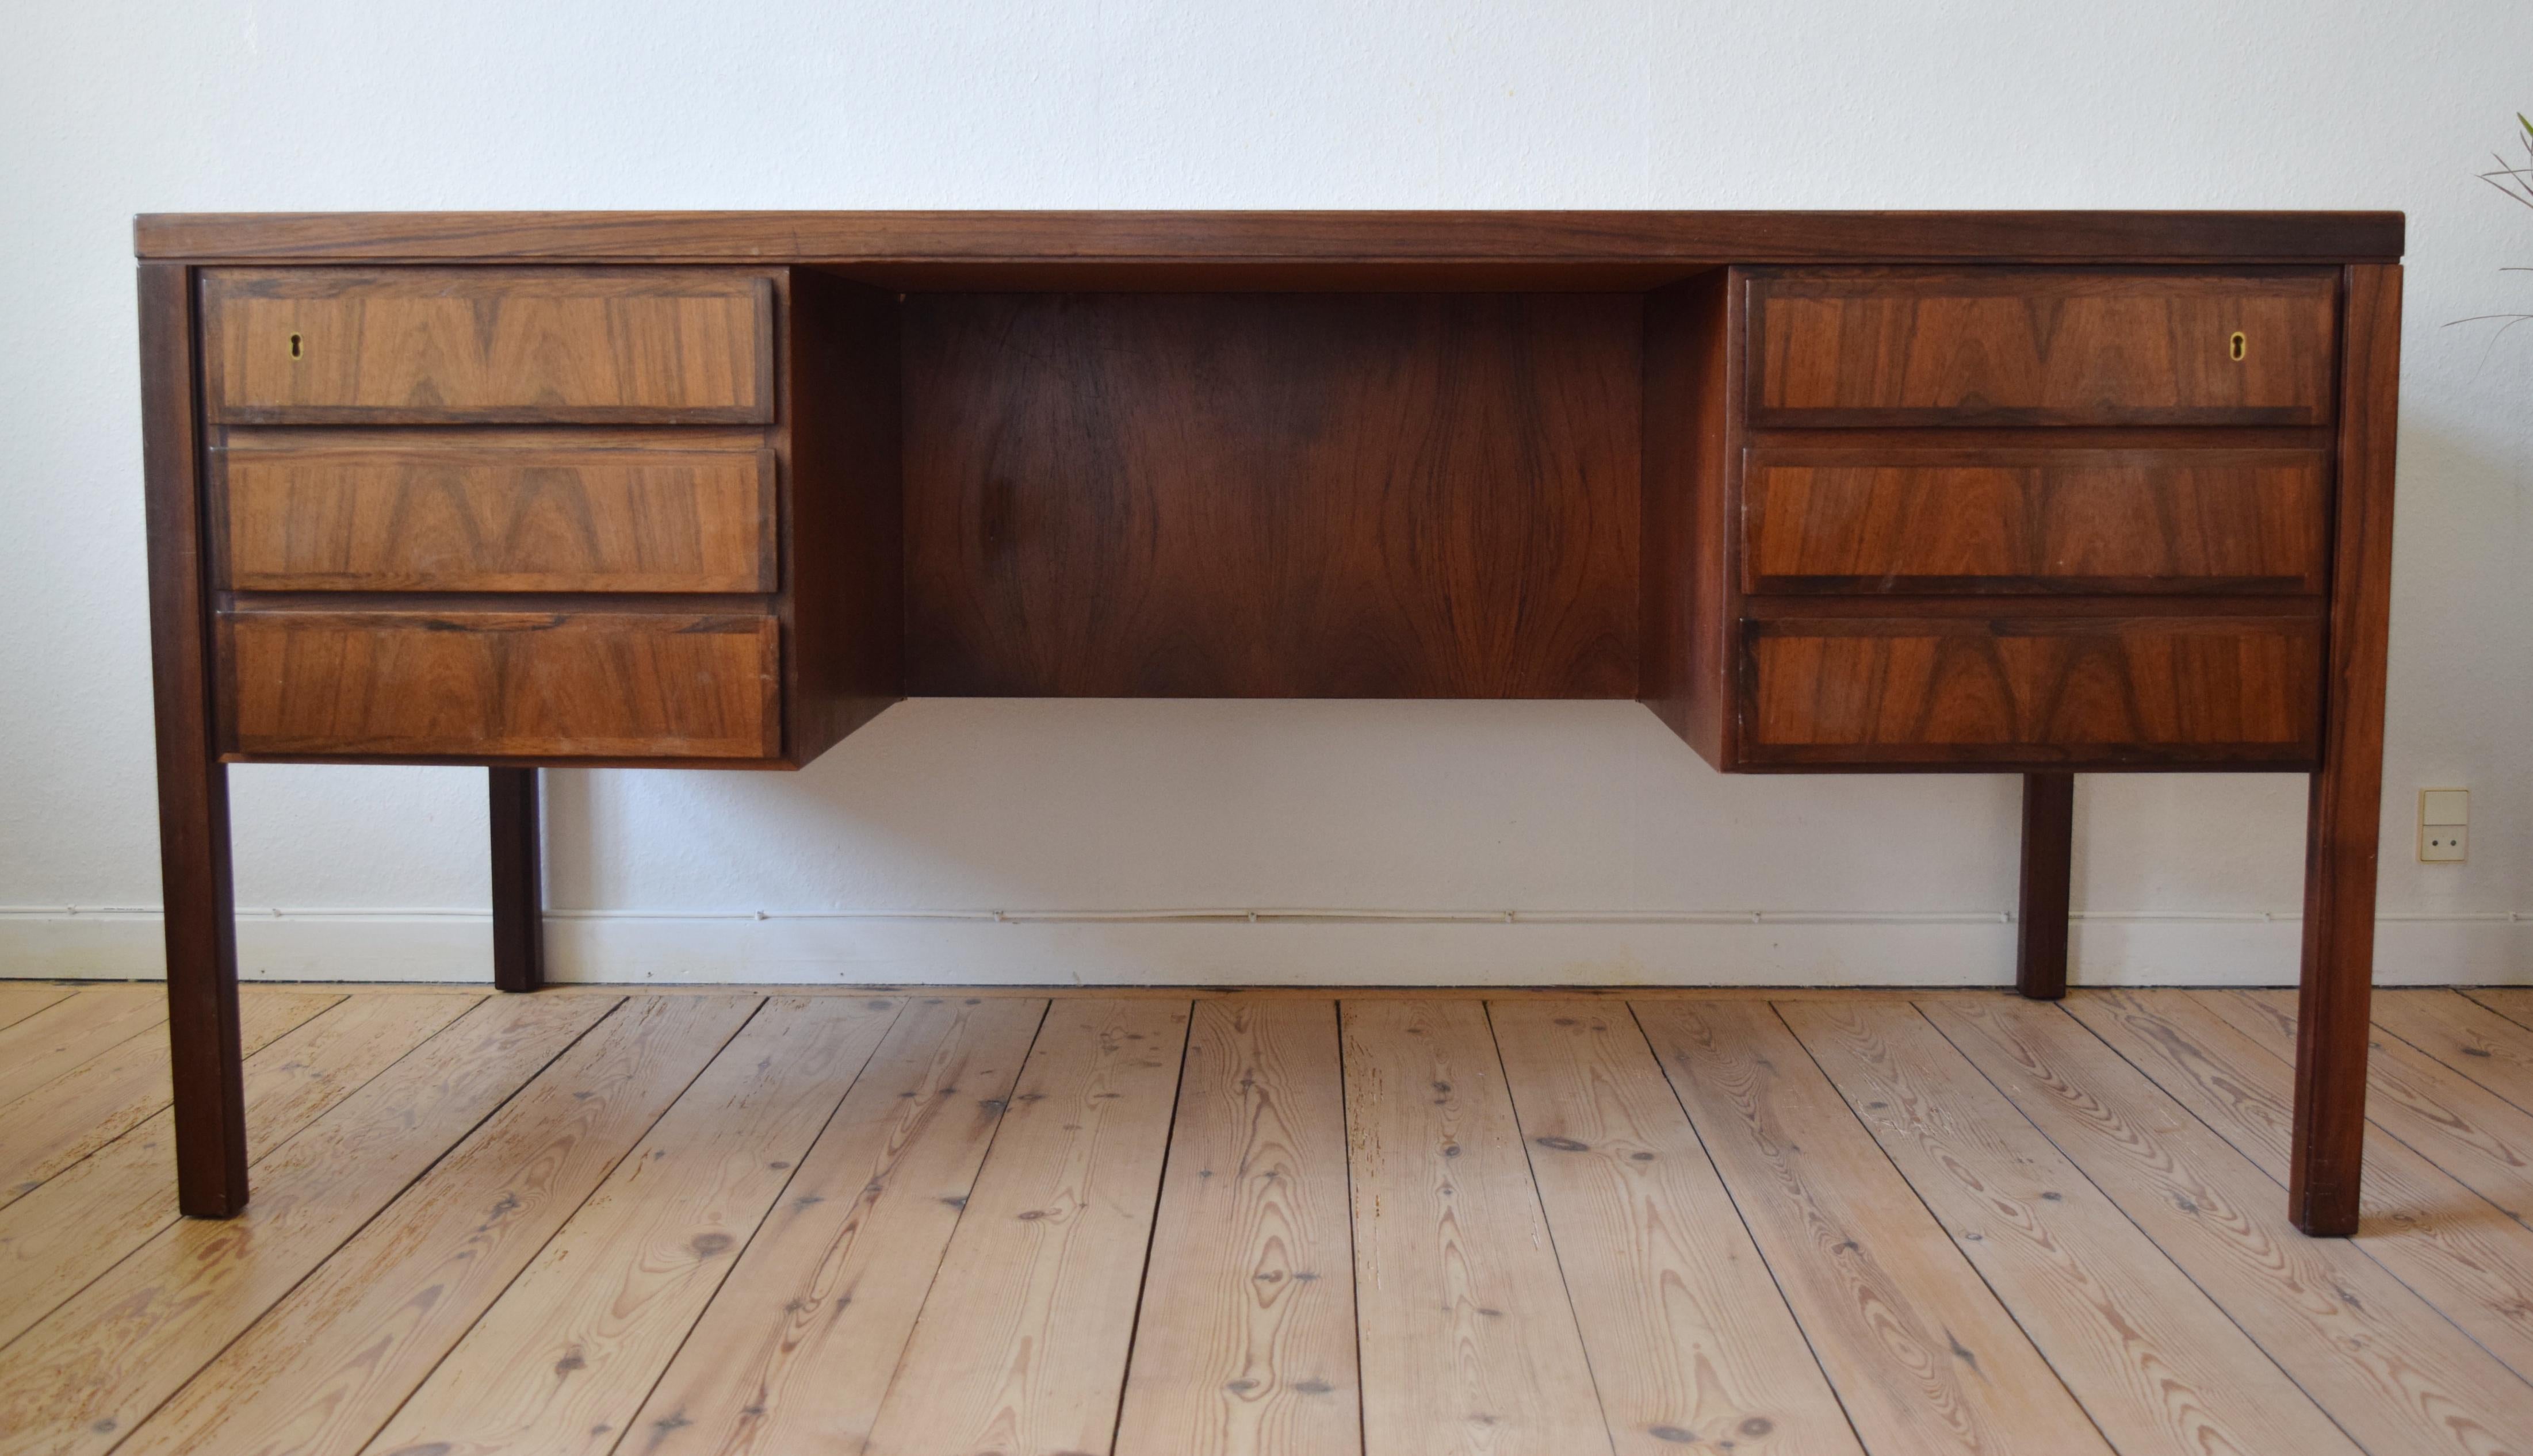 Large executive model 77 desk designed by Gunni Omann for Omann Jun Møbelfabrik, Denmark in the 1960s. This desk features six drawers (lockable) with bevelled edges and solid rosewood fronts with matched grain. On the rear are two compartments for